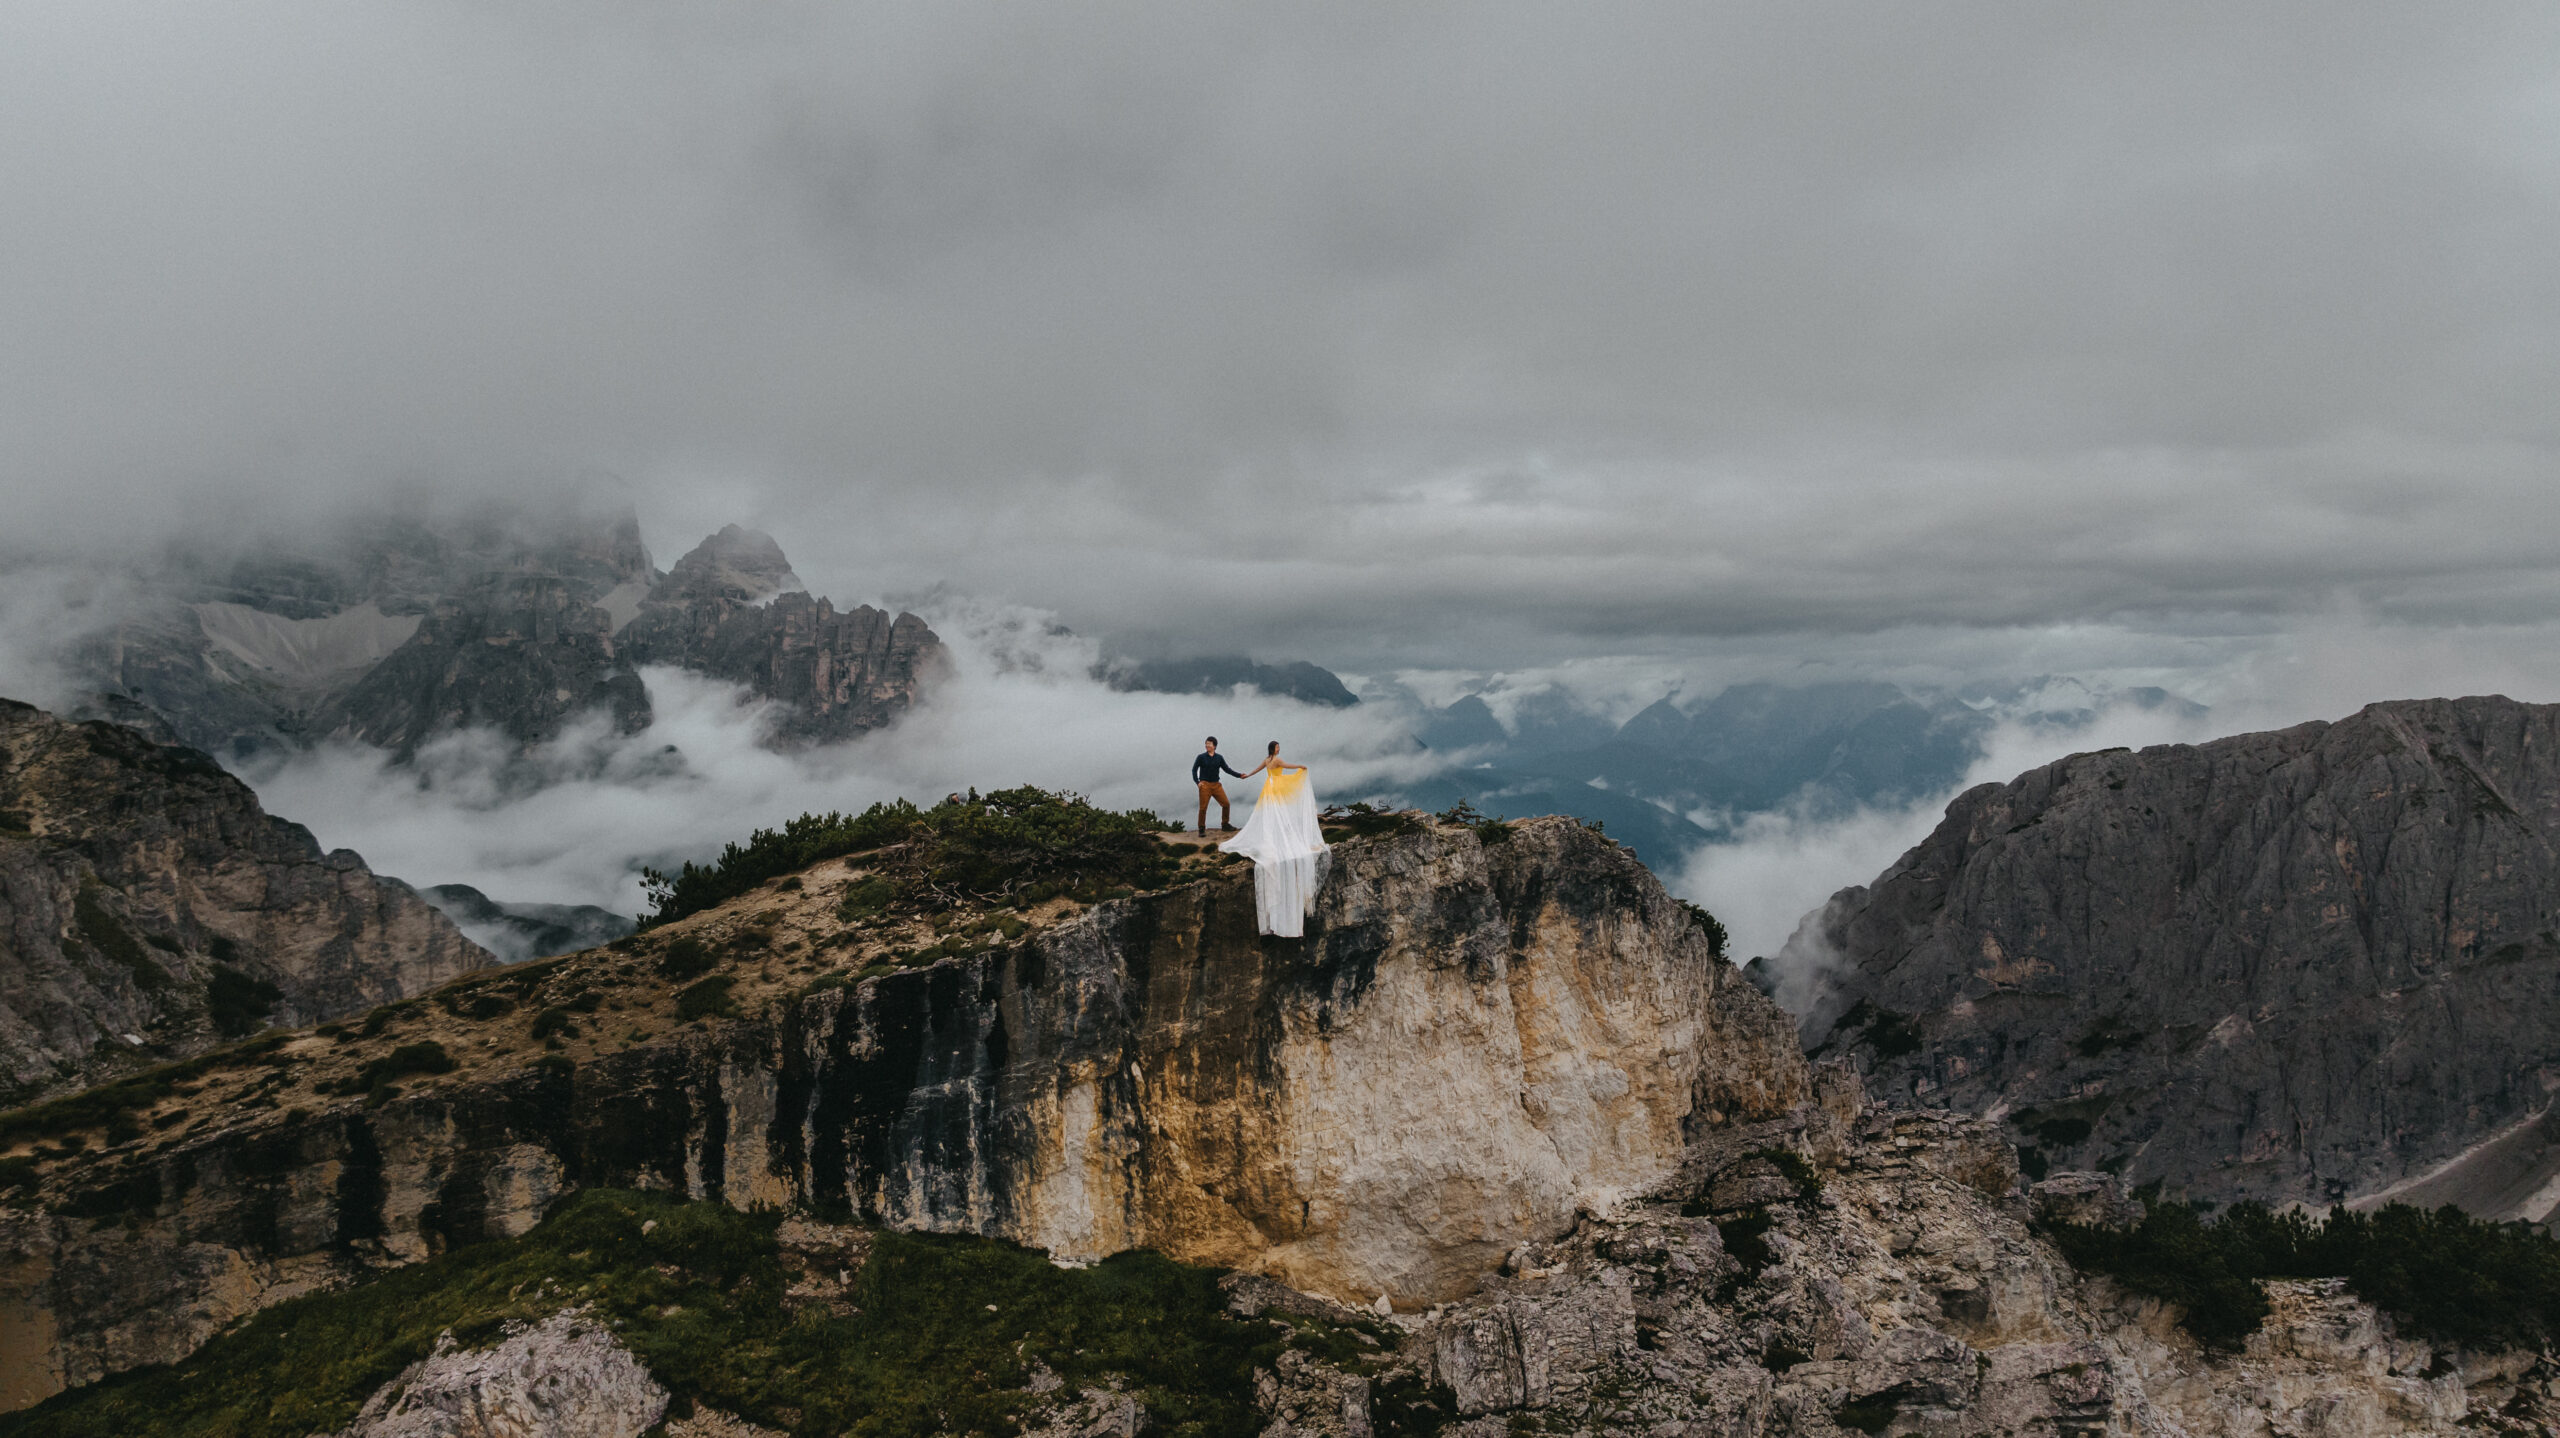 A cloudy pre wedding photoshoot in the Dolomites